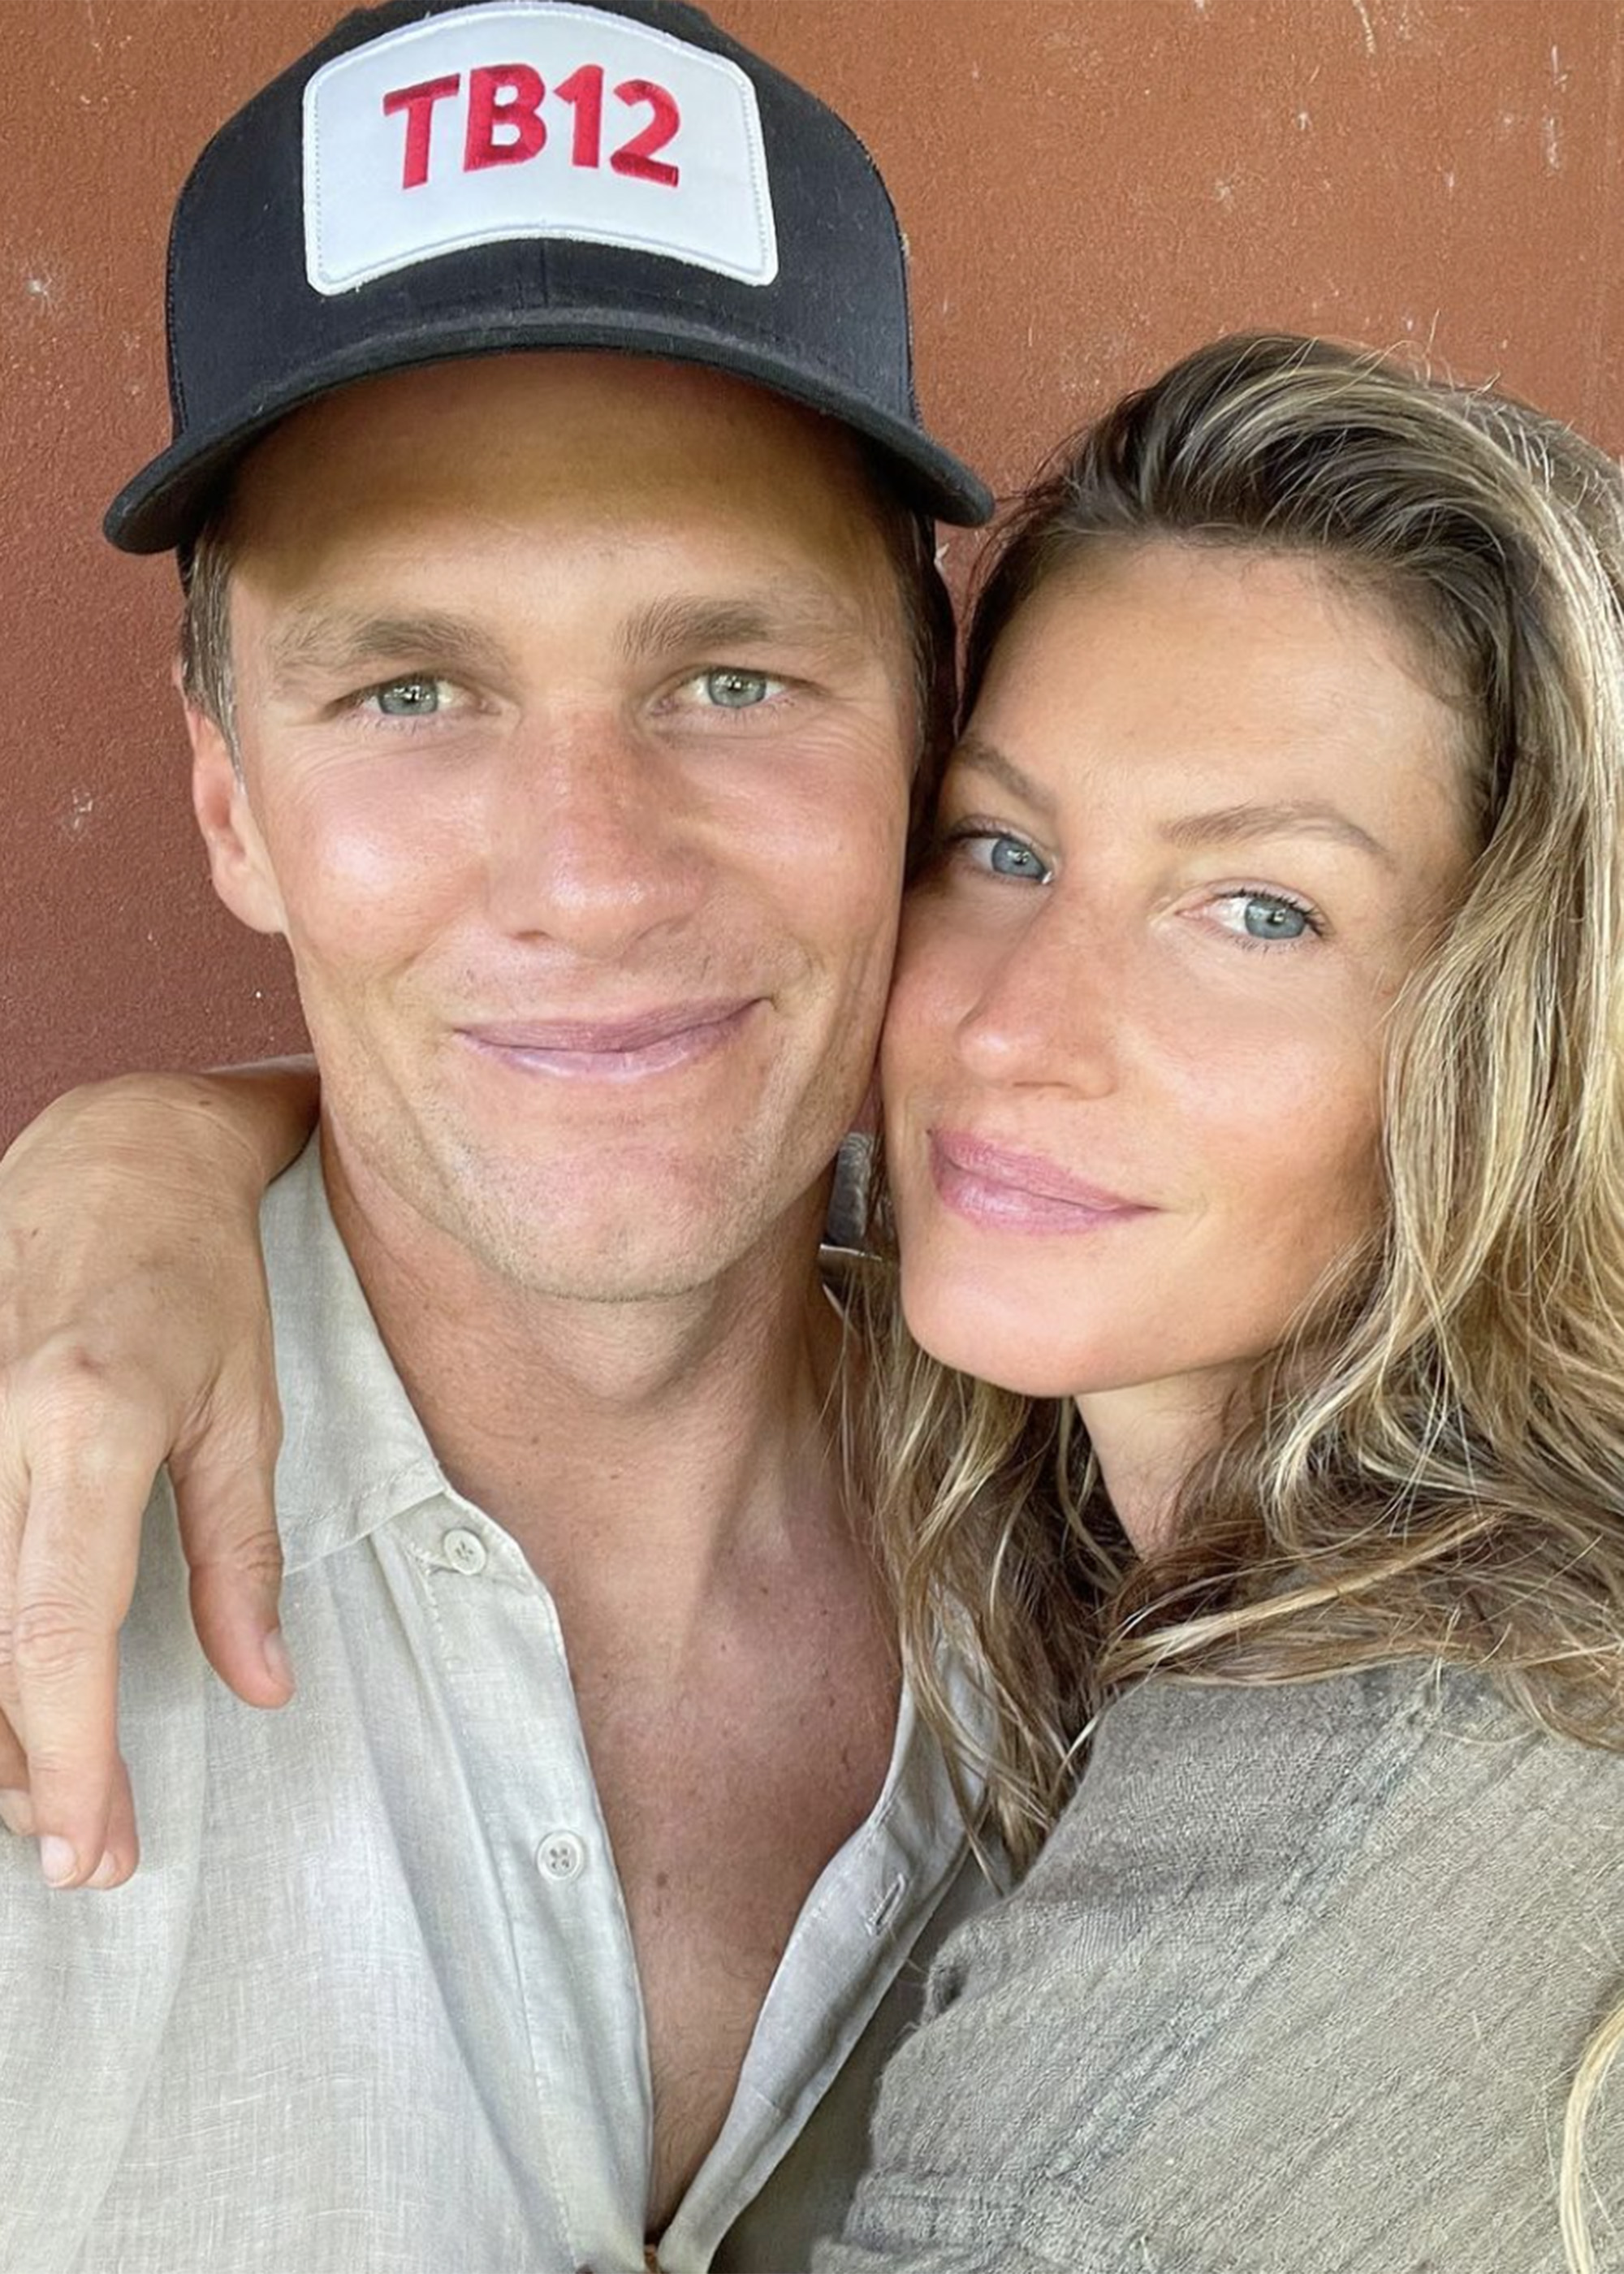 A recent report alleged that Tom Brady enjoyed "family time with his wife, Gisele Bündchen," amid his absence from the Buccaneers.